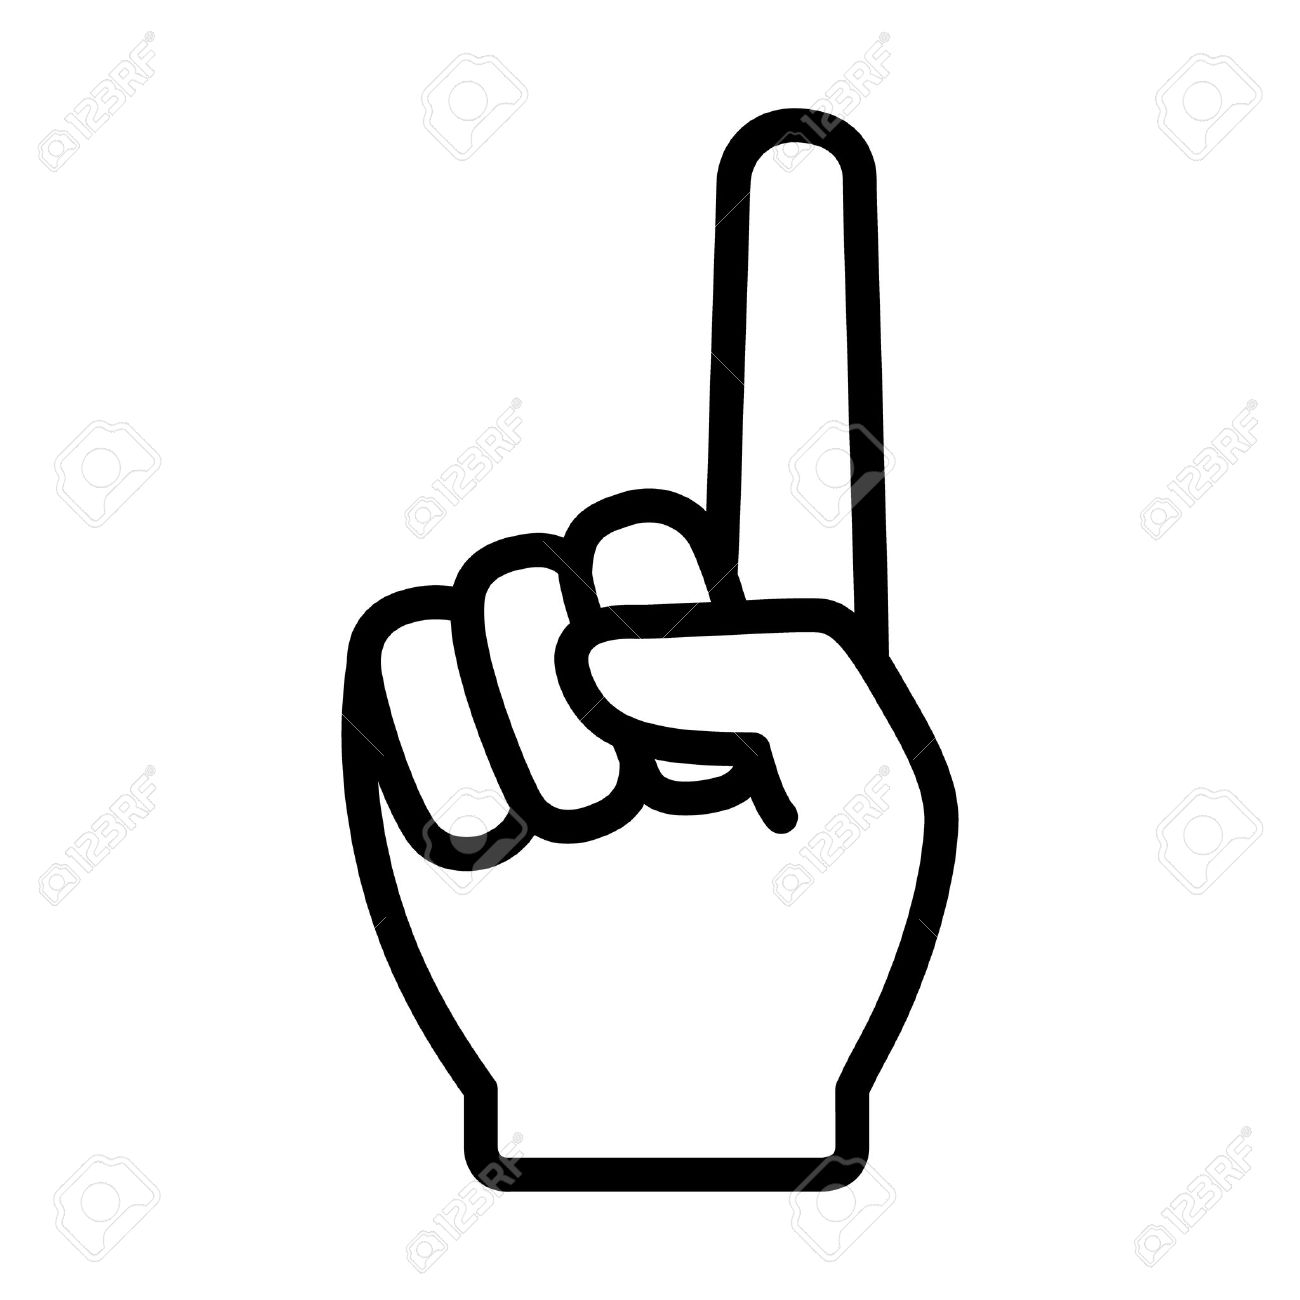 51673257-hand-with-number-1-one-finger-line-art-icon-for-apps-and-websites.jpg